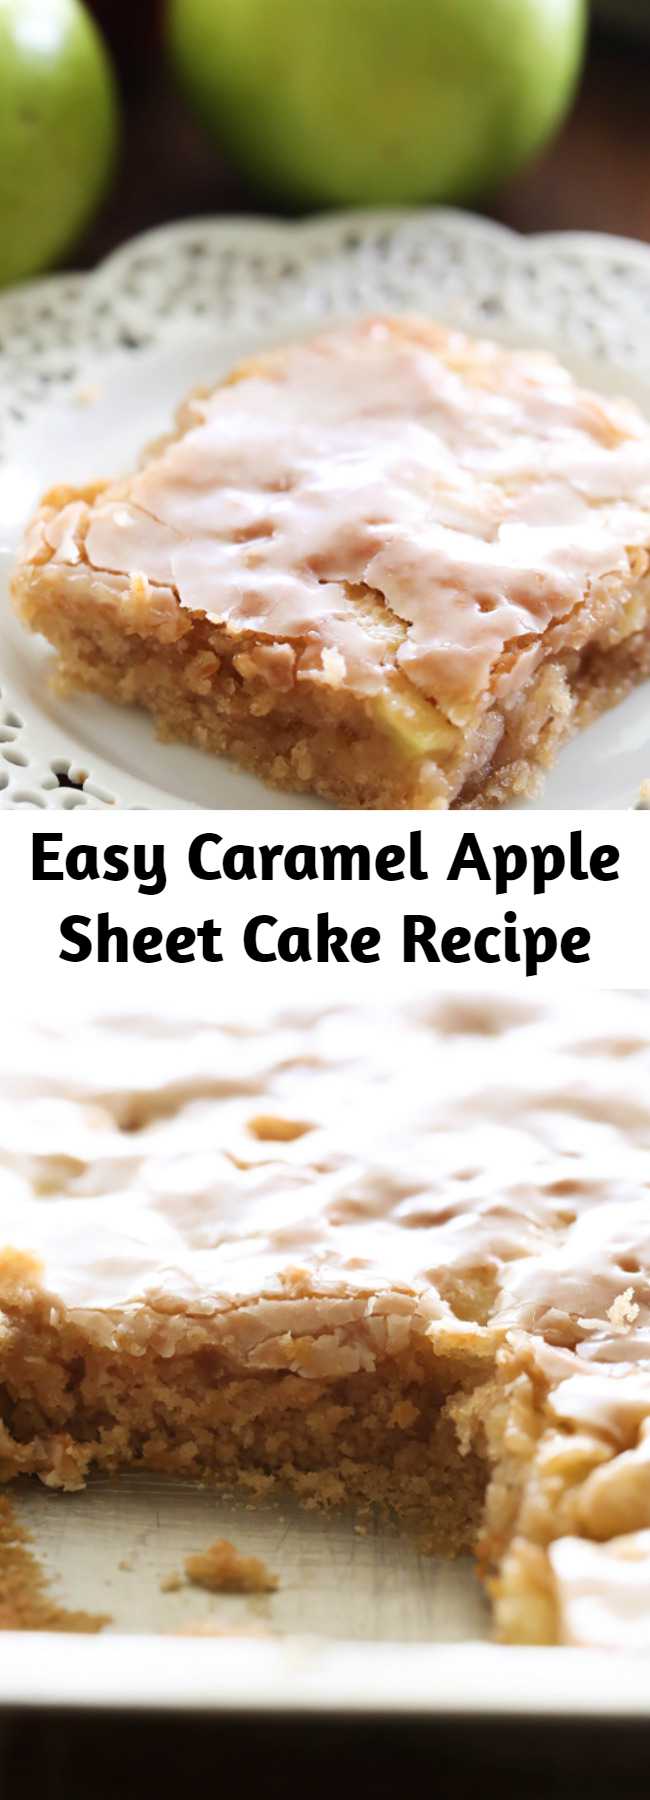 Easy Caramel Apple Sheet Cake Recipe - This delicious apple cake is perfectly moist and has caramel frosting infused in each and every bite! It is heavenly!